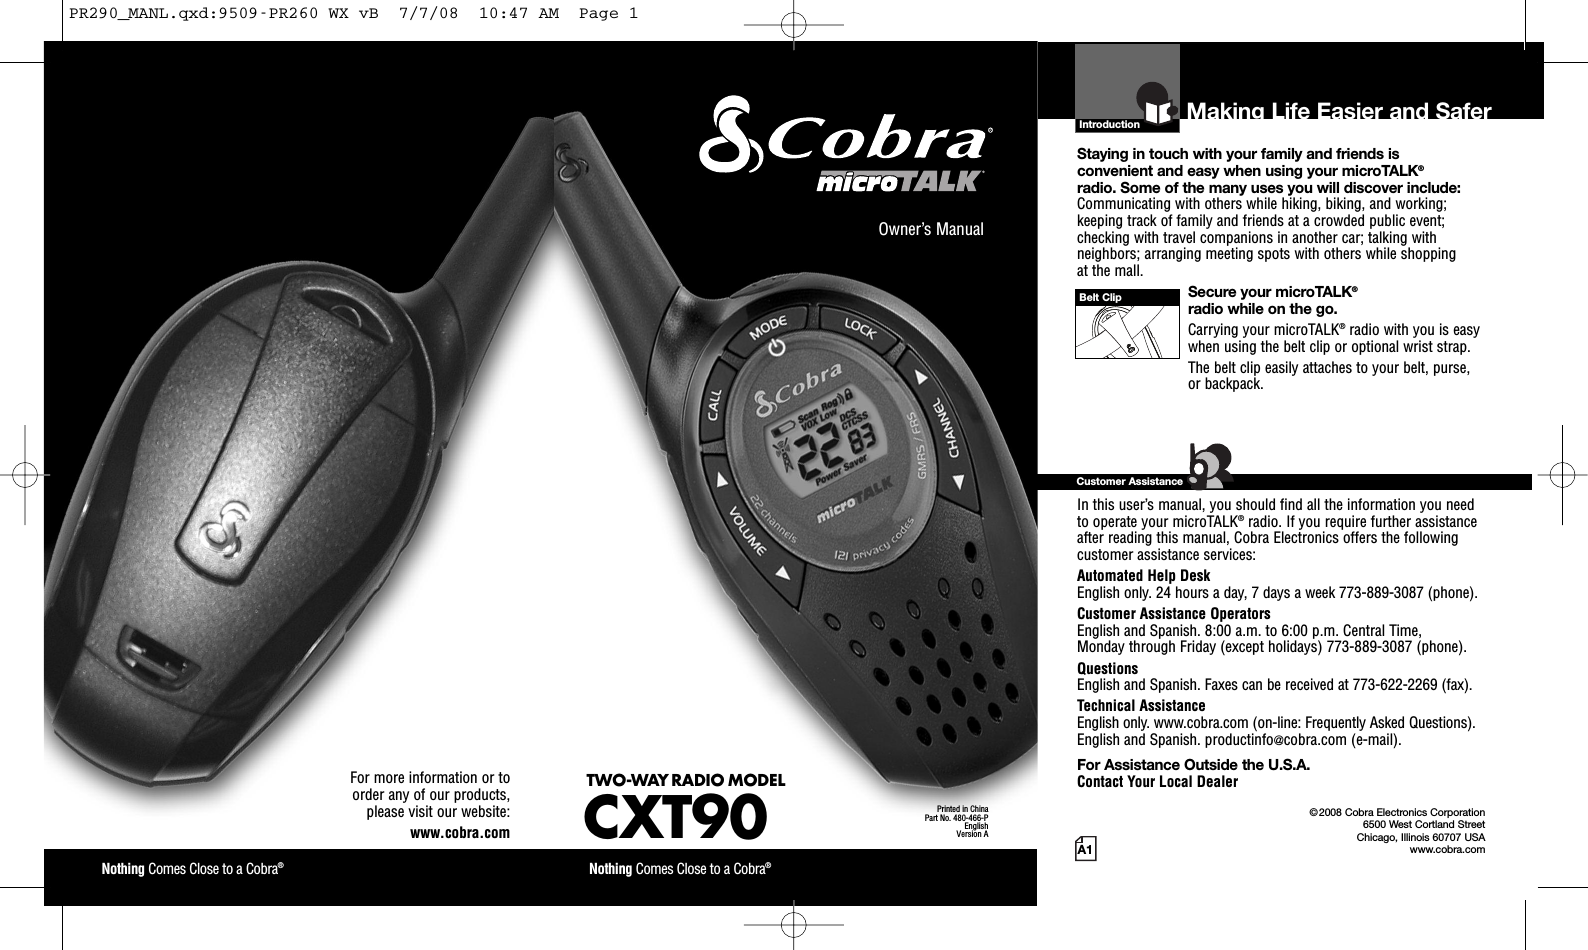 Introduction©2008 Cobra Electronics Corporation6500 West Cortland StreetChicago, Illinois 60707 USAwww.cobra.comMaking Life Easier and SaferStaying in touch with your family and friends isconvenient and easy when using your microTALK®radio. Some of the many uses you will discover include:Communicating with others while hiking, biking, and working;keeping track of family and friends at a crowded public event;checking with travel companions in another car; talking withneighbors; arranging meeting spots with others while shoppingat the mall.Secure your microTALK®radio while on the go.Carrying your microTALK®radio with you is easywhen using the belt clip or optional wrist strap.The belt clip easily attaches to your belt, purse,or backpack.For Assistance in the U.S.A.In this user’s manual, you should find all the information you needto operate your microTALK®radio. If you require further assistanceafter reading this manual, Cobra Electronics offers the followingcustomer assistance services:Automated Help DeskEnglish only. 24 hours a day, 7 days a week 773-889-3087 (phone).Customer Assistance OperatorsEnglish and Spanish. 8:00 a.m. to 6:00 p.m. Central Time,Monday through Friday (except holidays) 773-889-3087 (phone).QuestionsEnglish and Spanish. Faxes can be received at 773-622-2269 (fax).Technical AssistanceEnglish only. www.cobra.com (on-line: Frequently Asked Questions).English and Spanish. productinfo@cobra.com (e-mail).For Assistance Outside the U.S.A.Contact Your Local DealerCustomer AssistanceA1Owner’s ManualNothing Comes Close to a Cobra®Nothing Comes Close to a Cobra®For more information or toorder any of our products,please visit our website:www.cobra.comBelt ClipPrinted in ChinaPart No. 480-466-PEnglishVersion ATWO-WAY RADIO MODELCXT90PR290_MANL.qxd:9509-PR260 WX vB  7/7/08  10:47 AM  Page 1